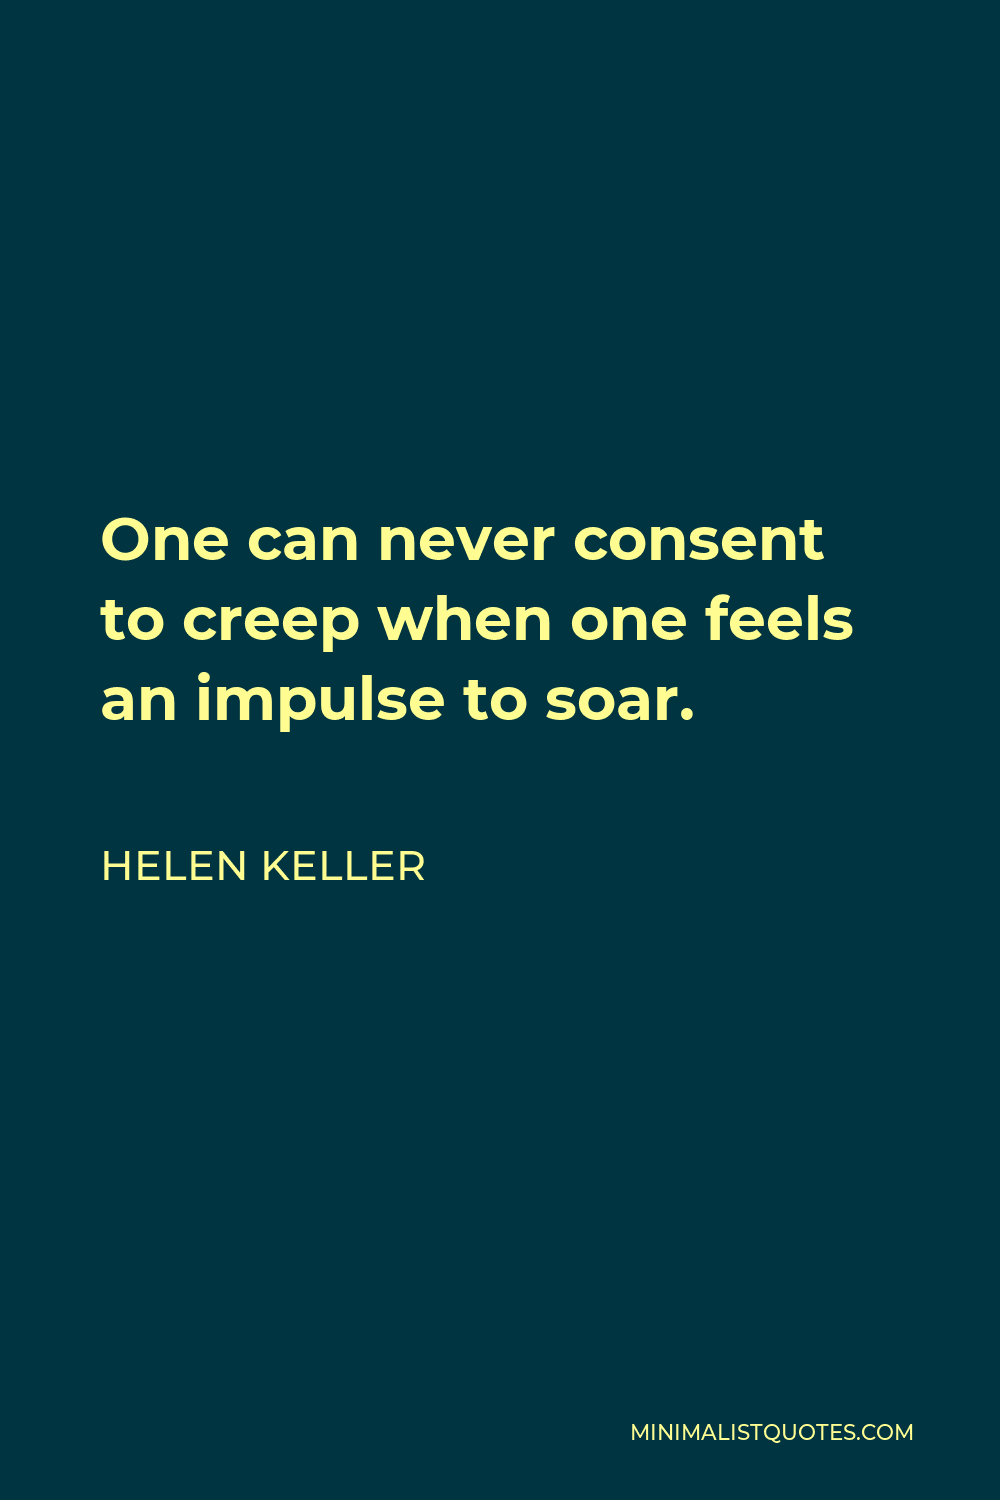 Helen Keller Quote - One can never consent to creep when one feels an impulse to soar.